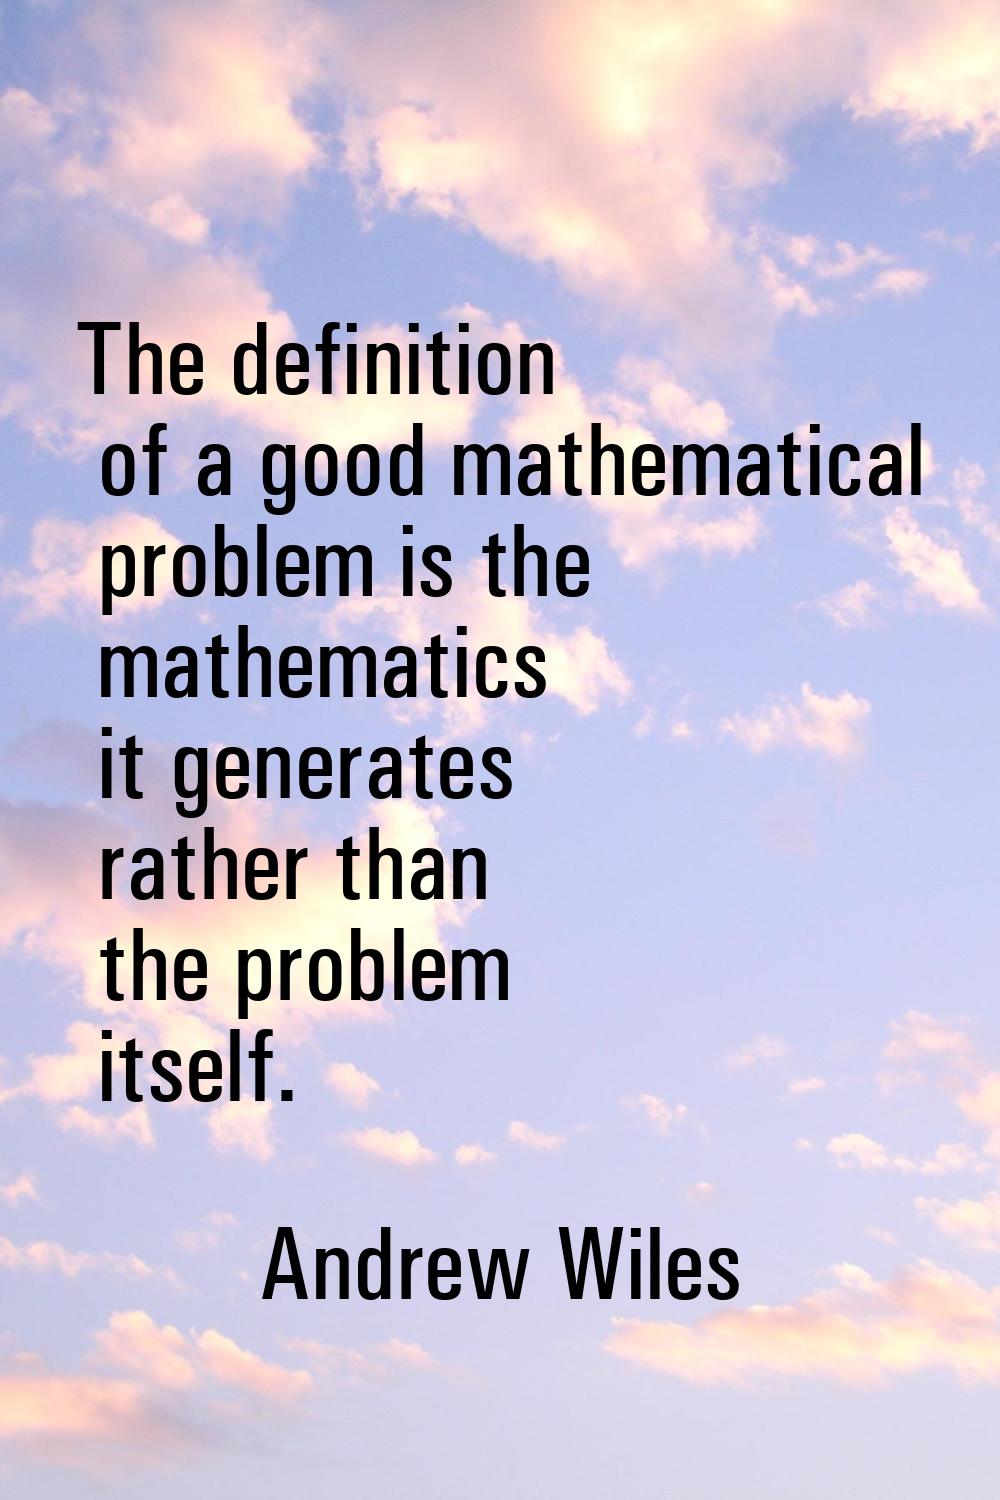 The definition of a good mathematical problem is the mathematics it generates rather than the probl